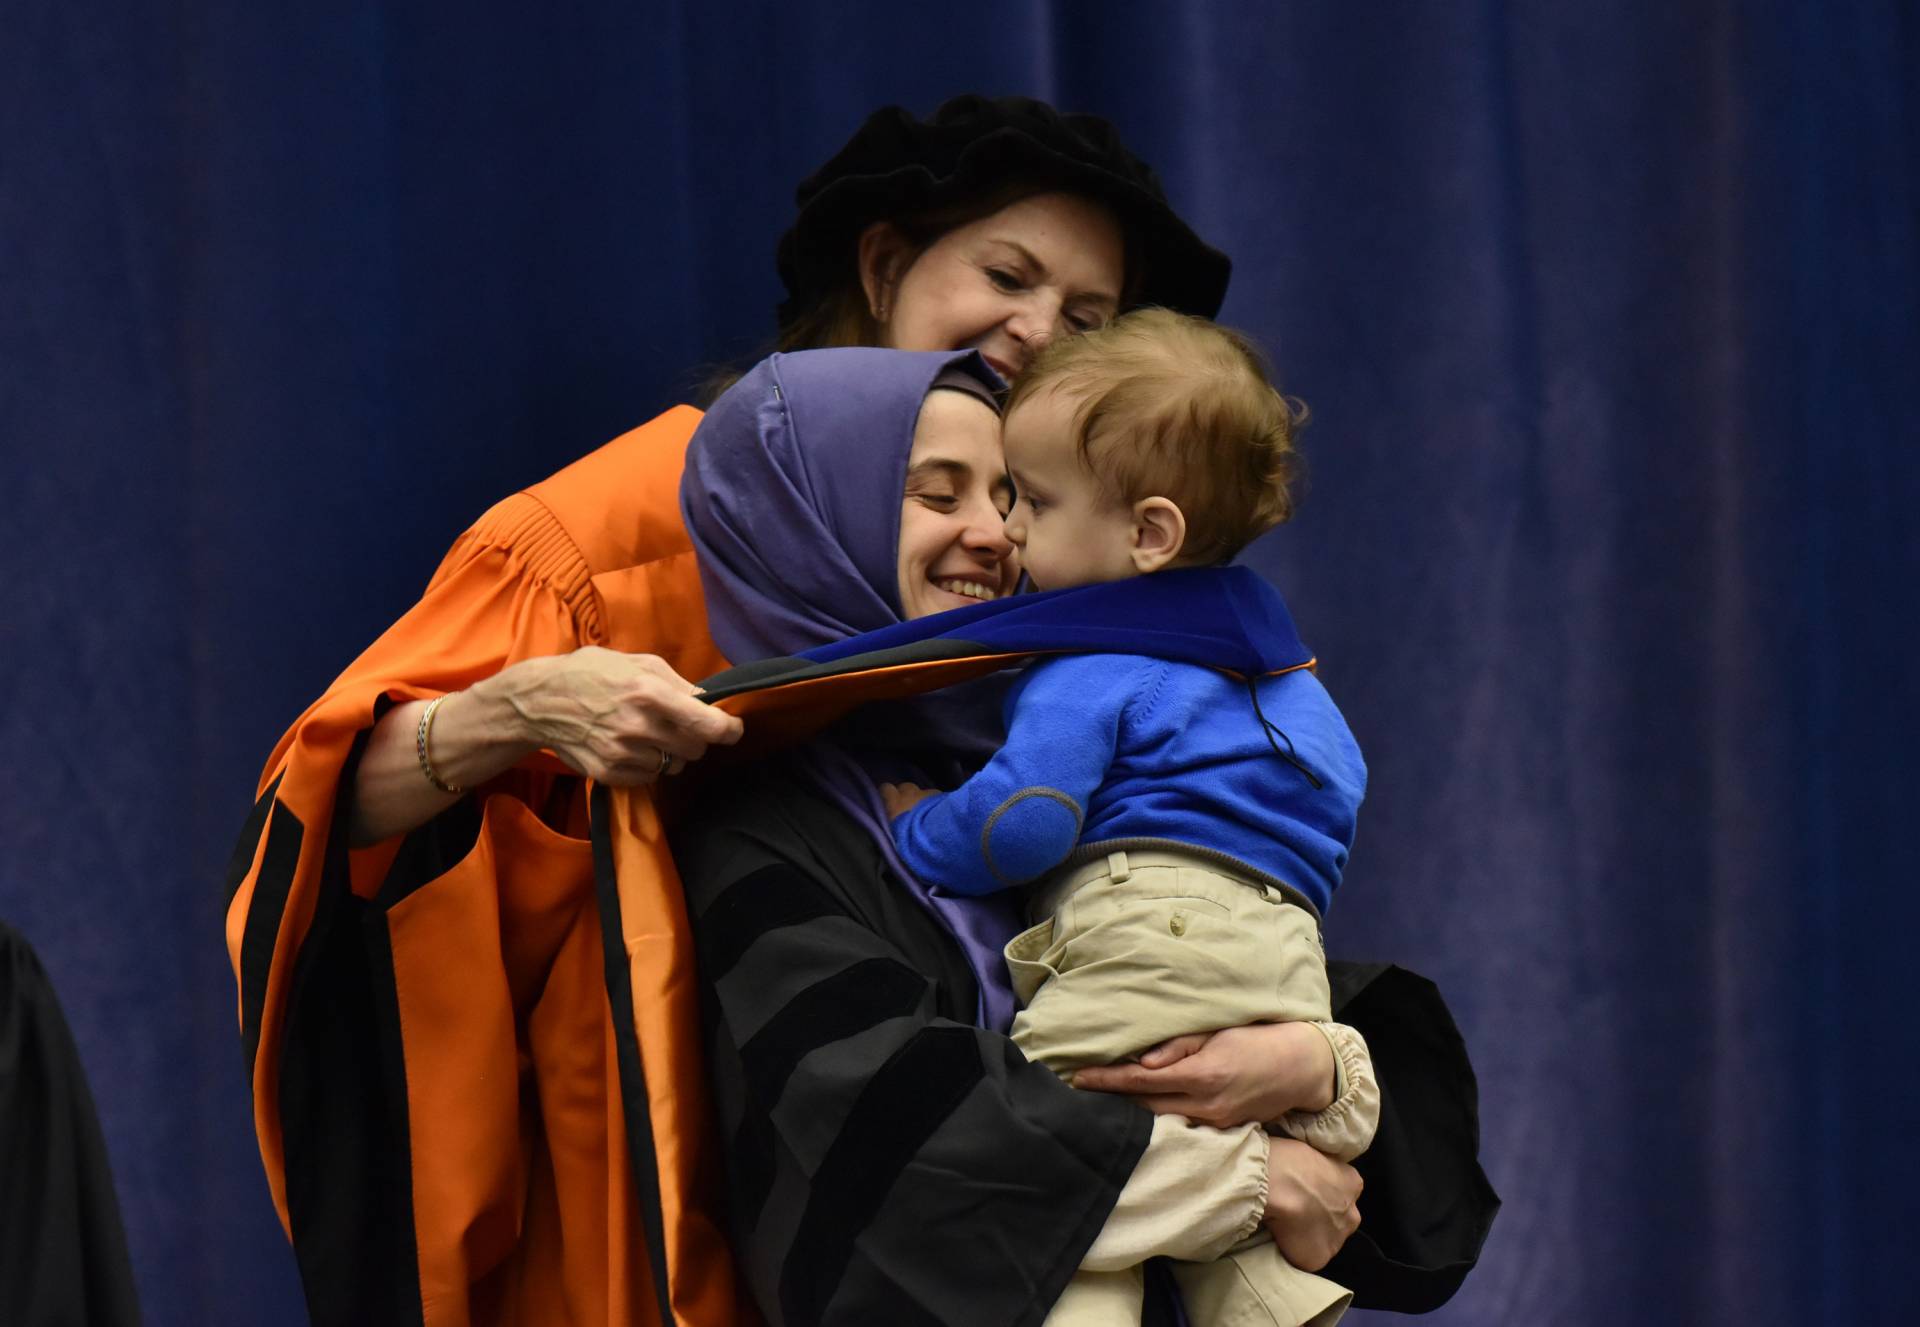 Student is hooded with child in arms